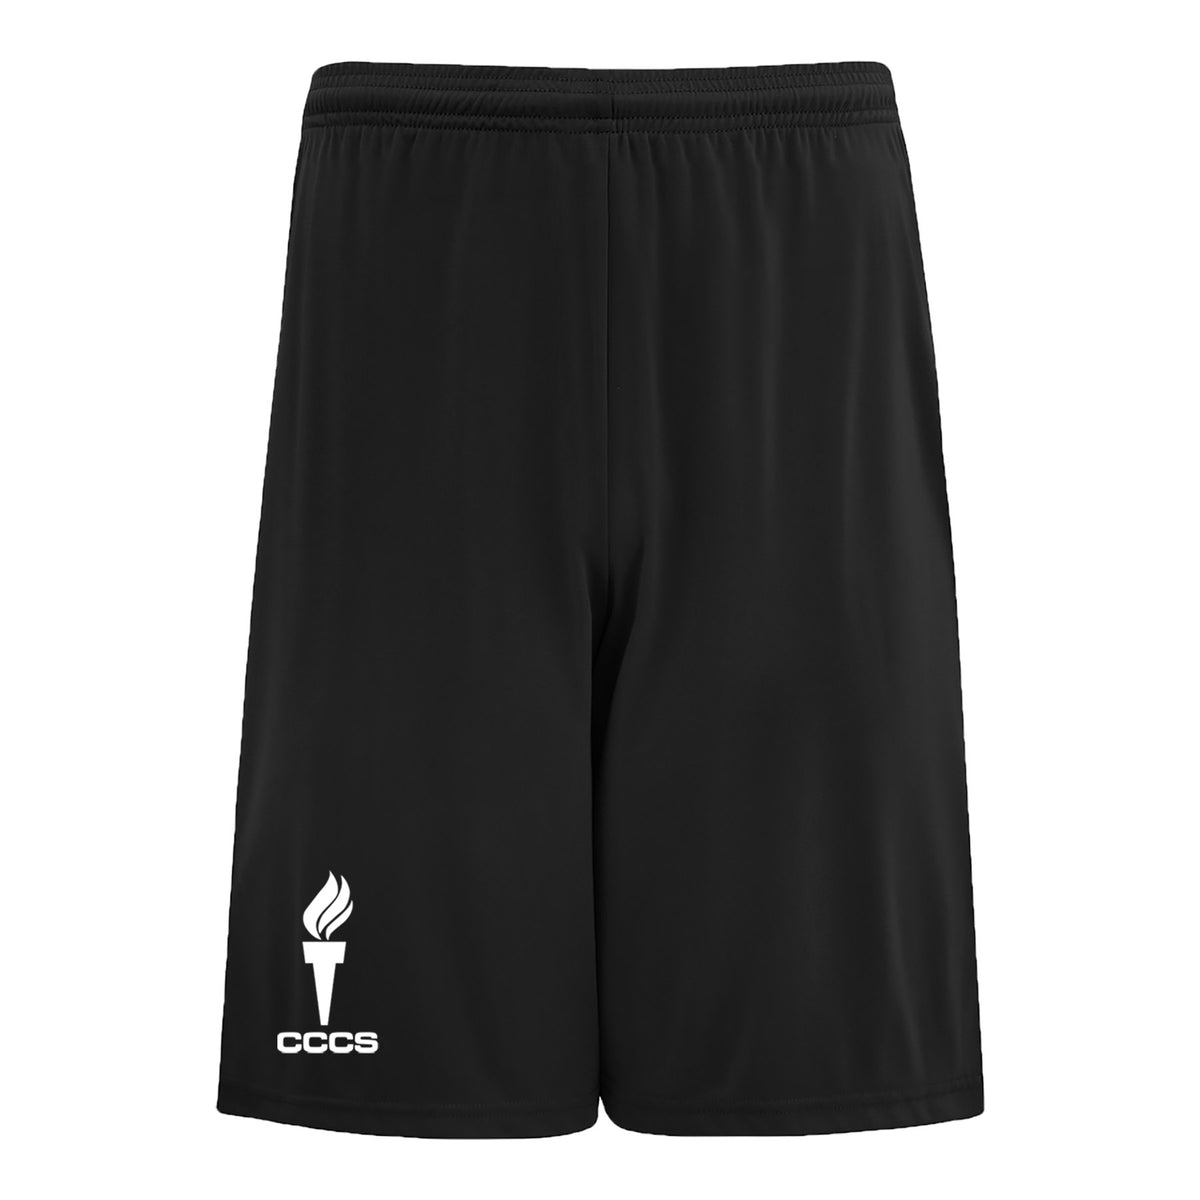 CATHEDRAL K-8 GYM SHORTS, WICKING, YOUTH